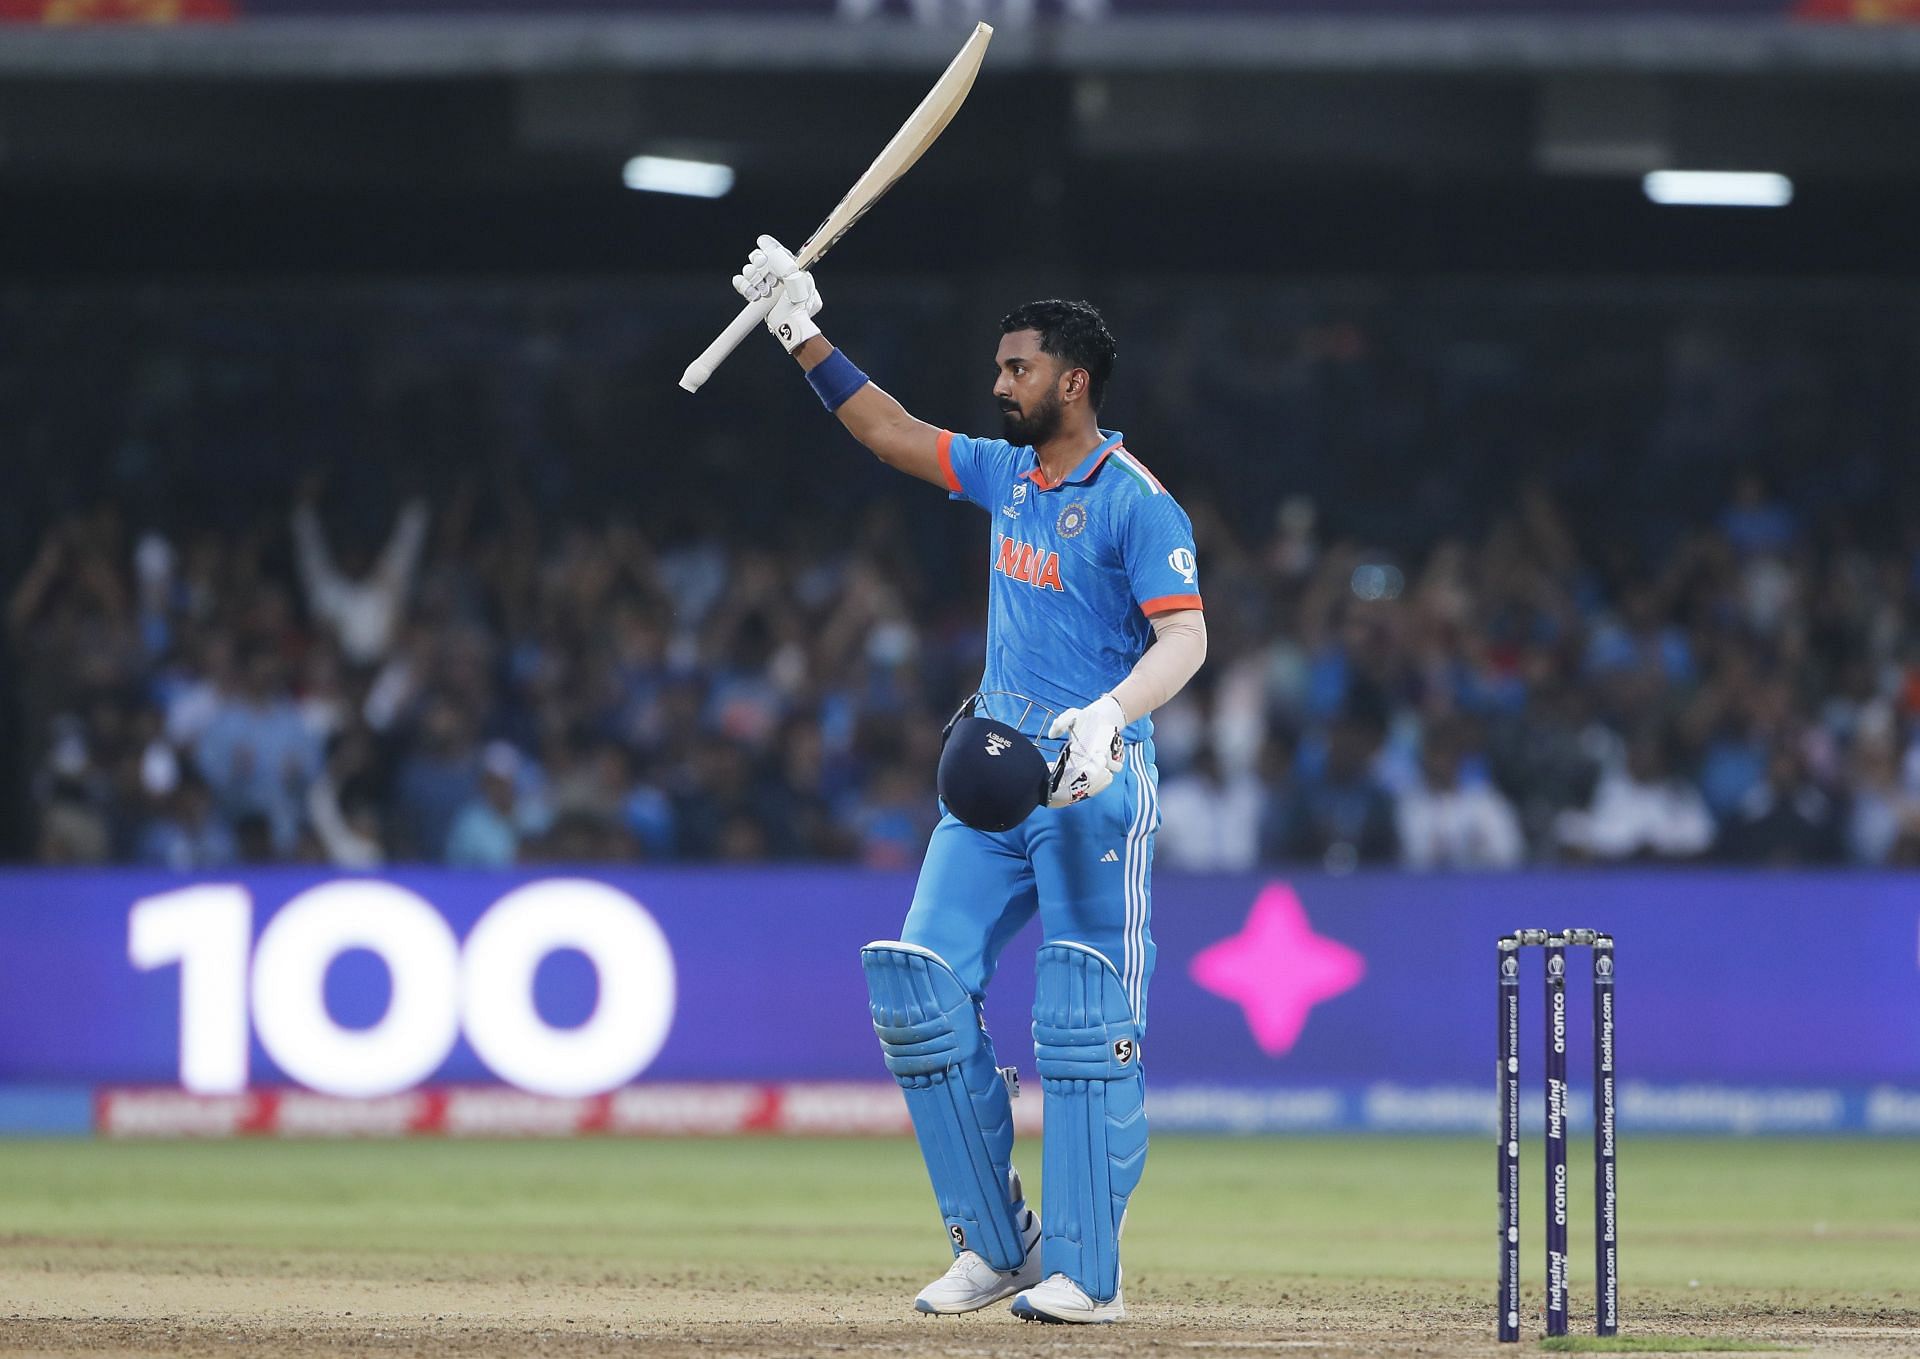 Kl Rahul has established himself as an all format player for India.